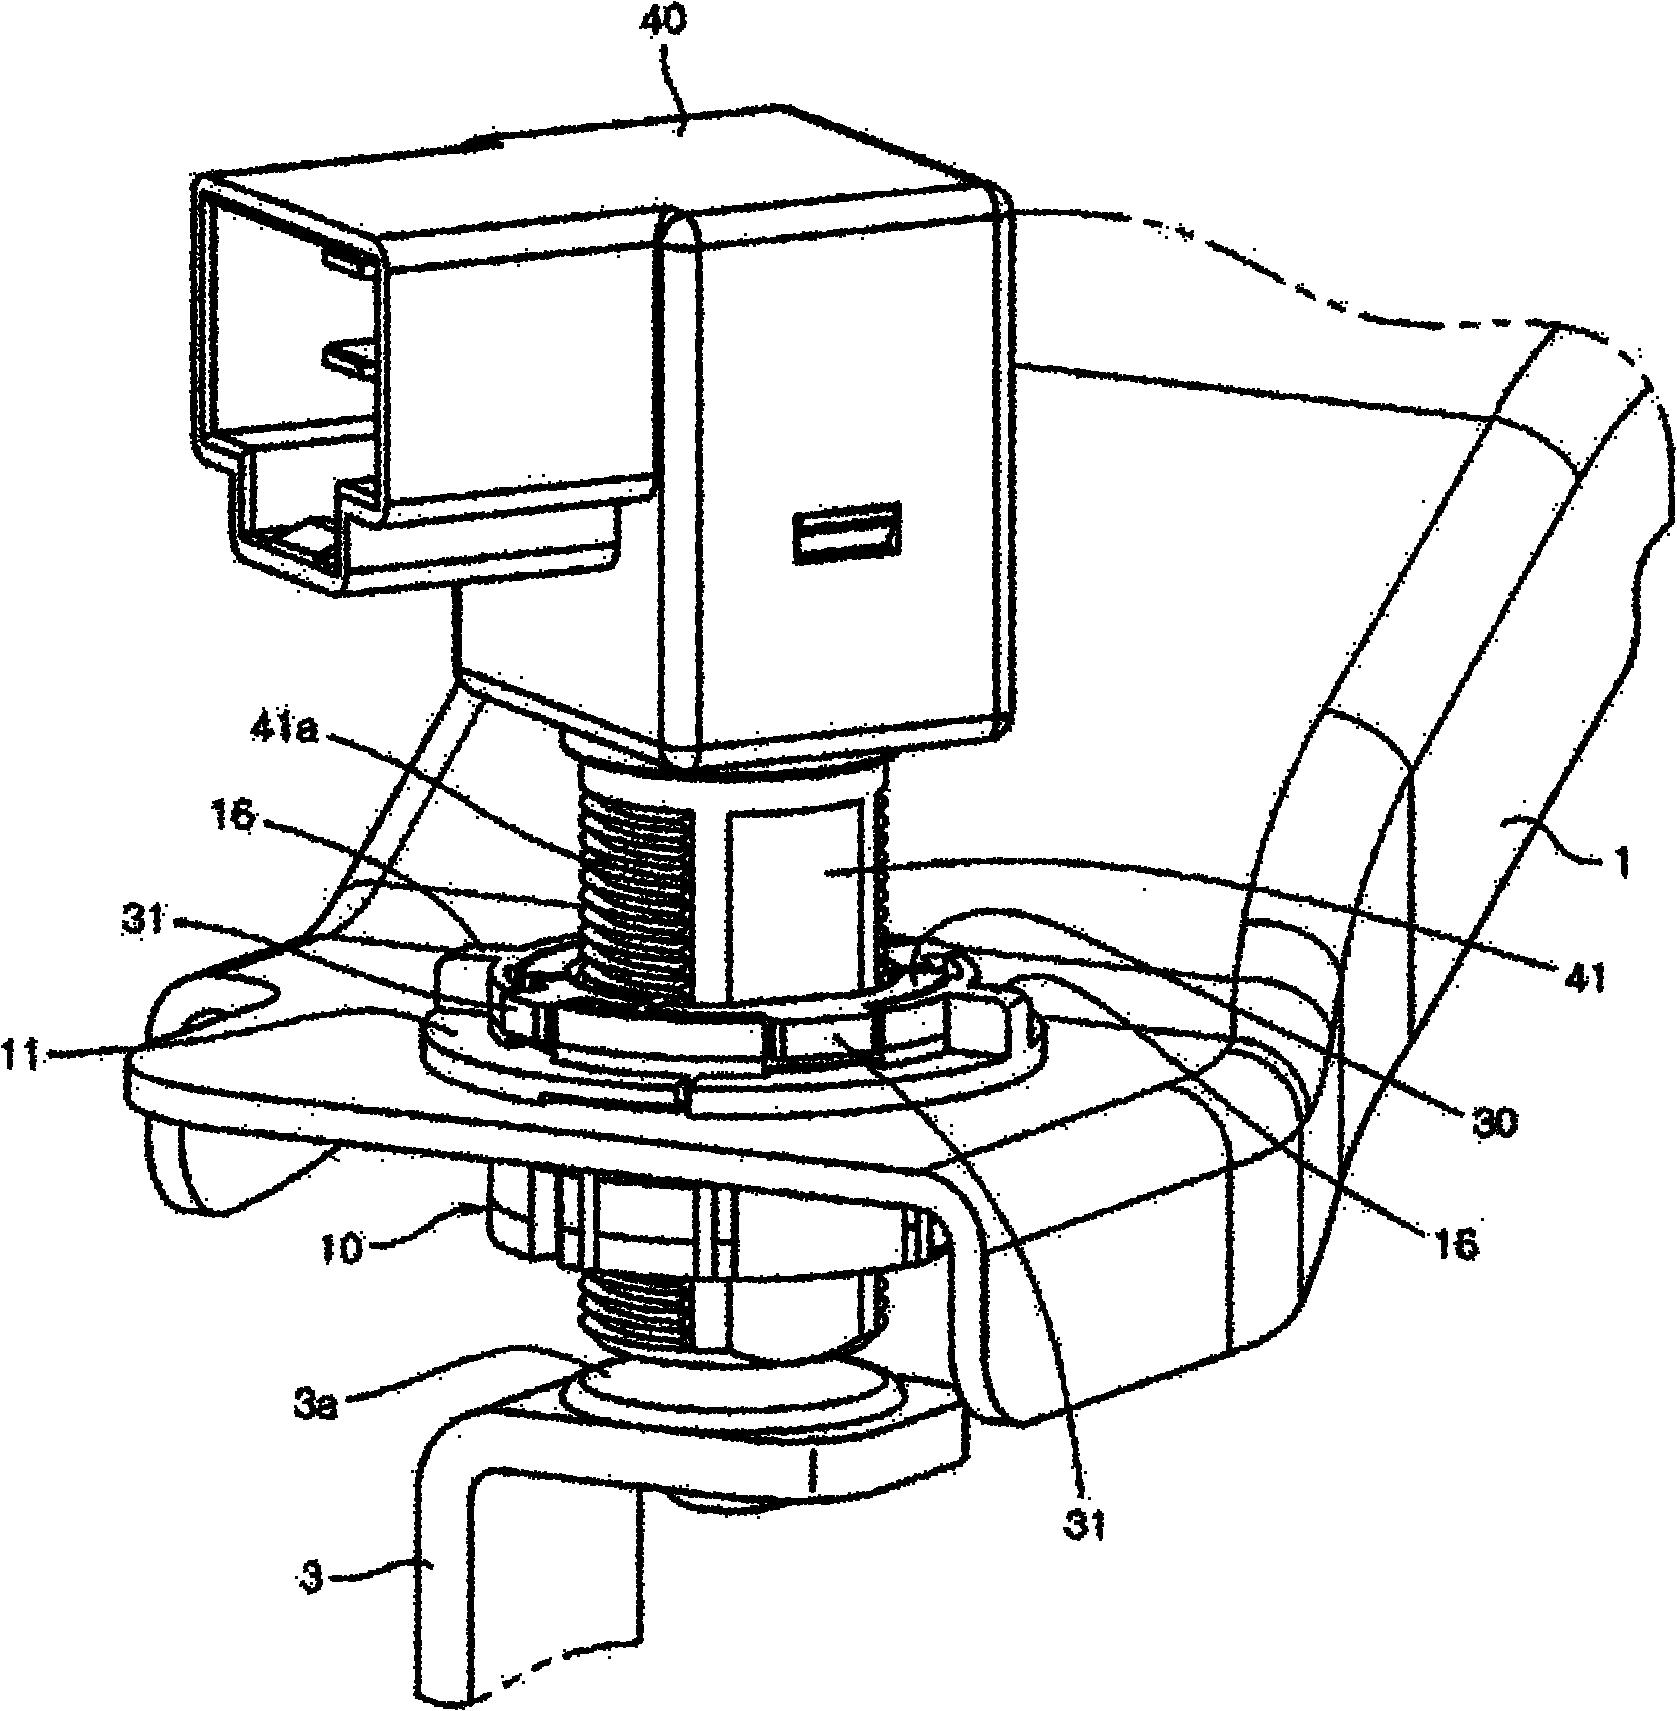 Automobile pedal switch fixing device